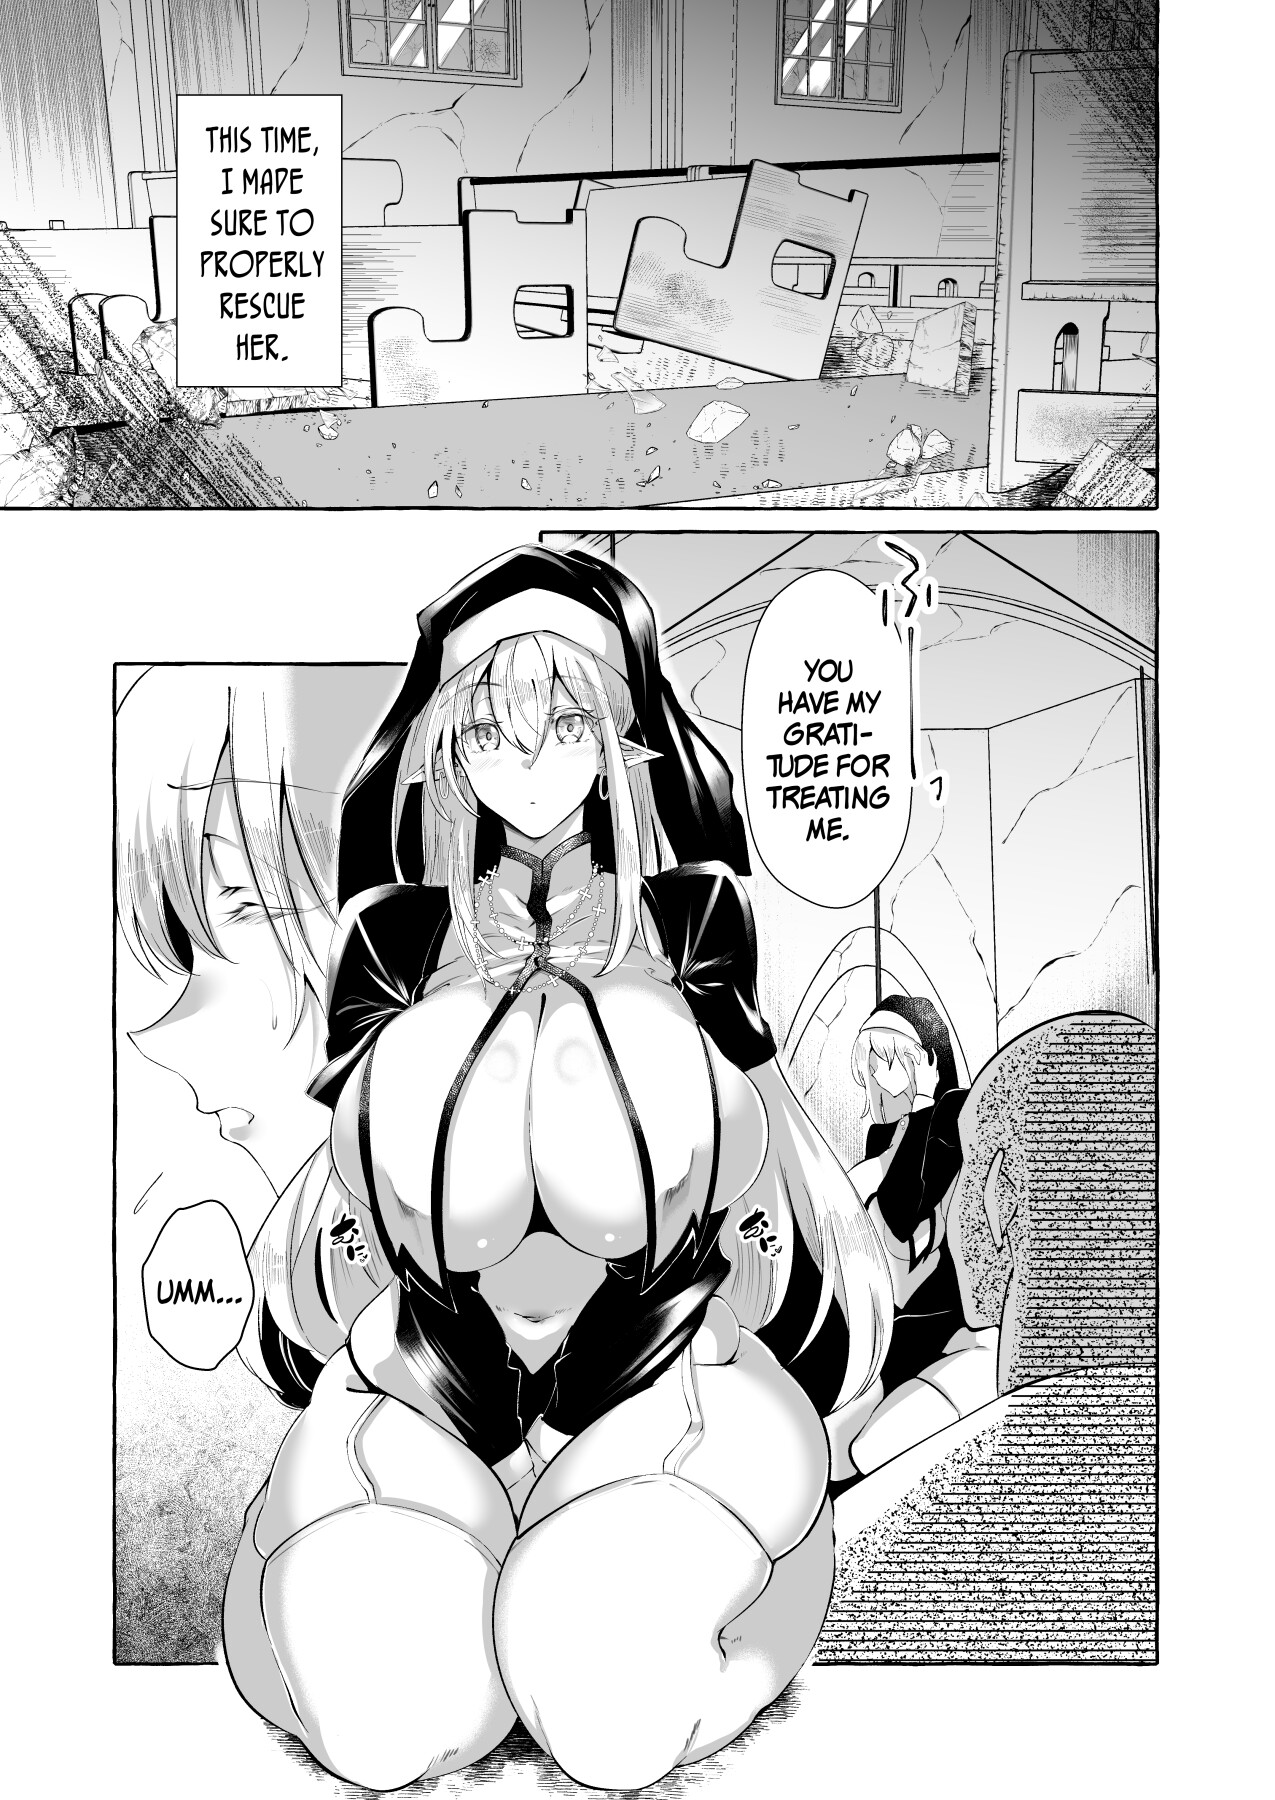 hentai manga Never Seen Series - Opportunistic Lust - An Elf Was Lying Right There So I Tried Pranking Her